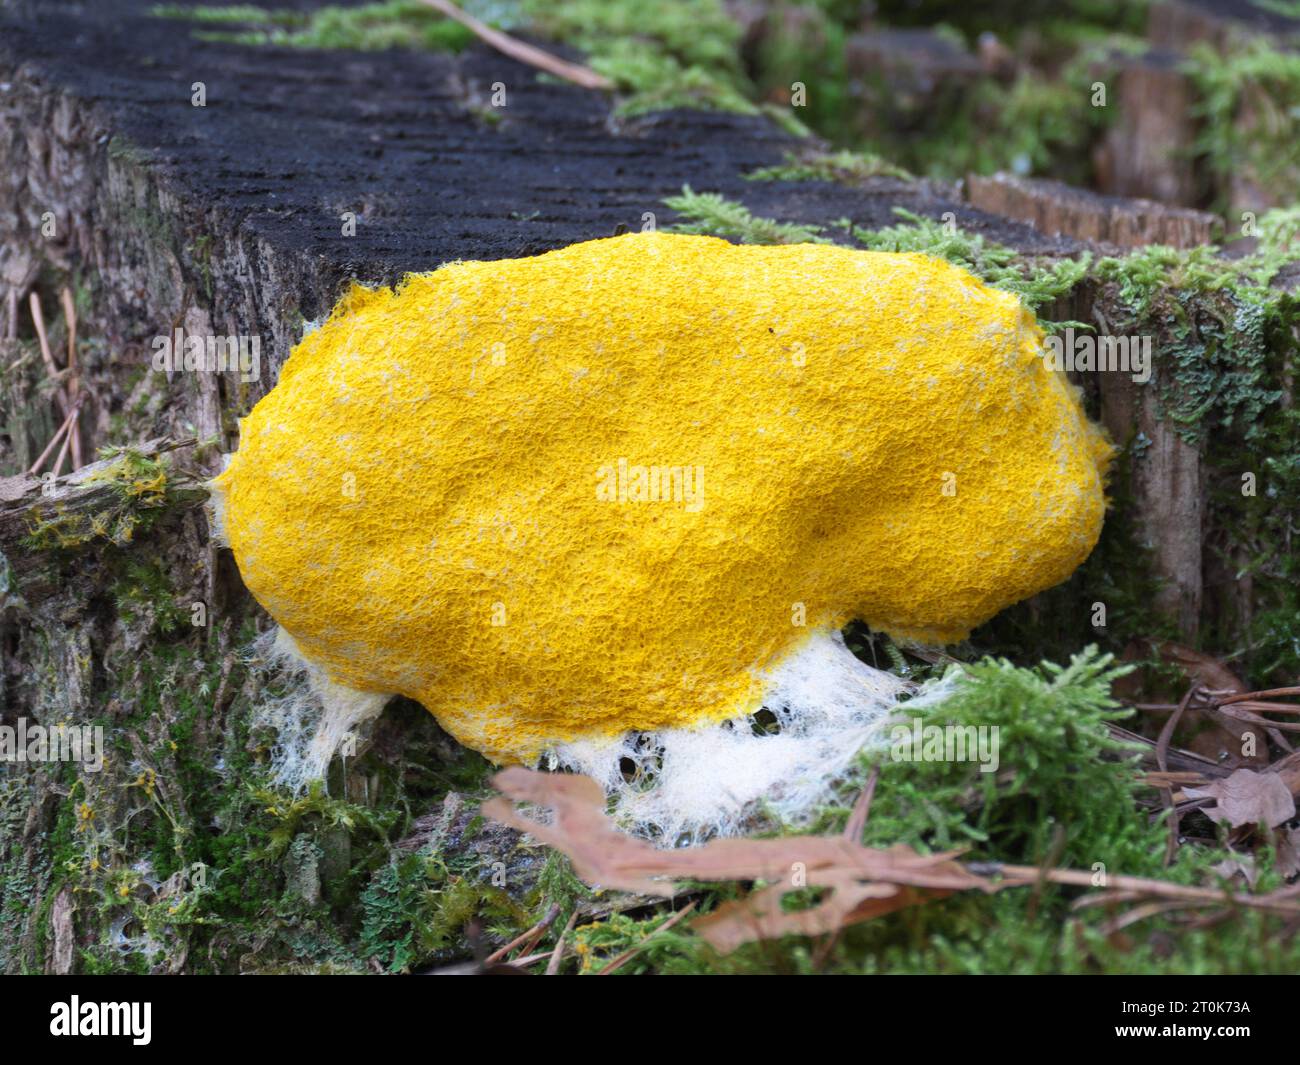 Yellow tan flower or witch butter (Fuligo septica) on a tree stump in forest Stock Photo